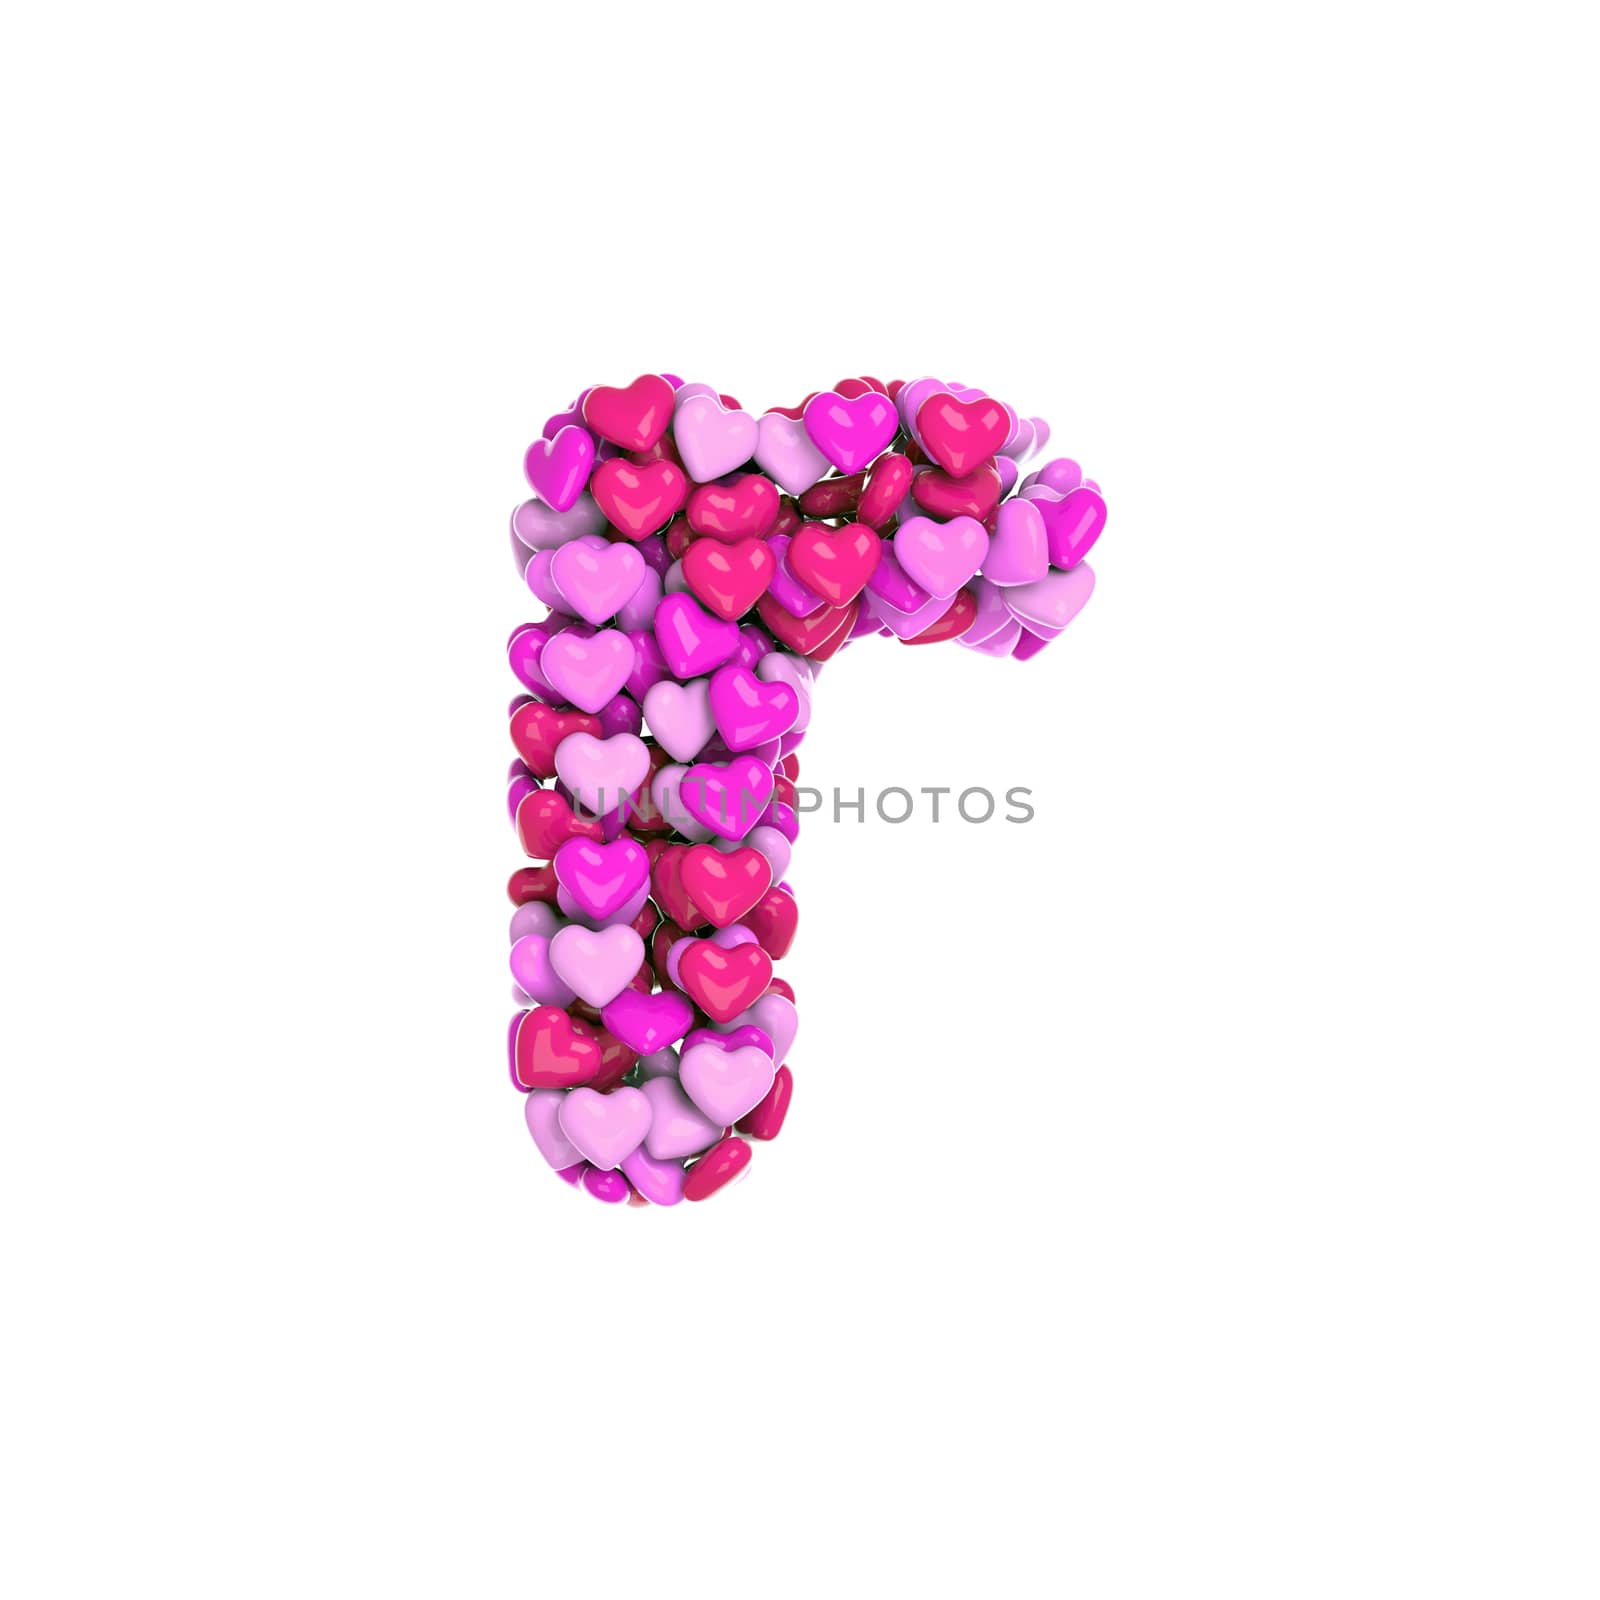 Valentine letter R - Small 3d pink hearts font - Love, passion or wedding concept by chrisroll